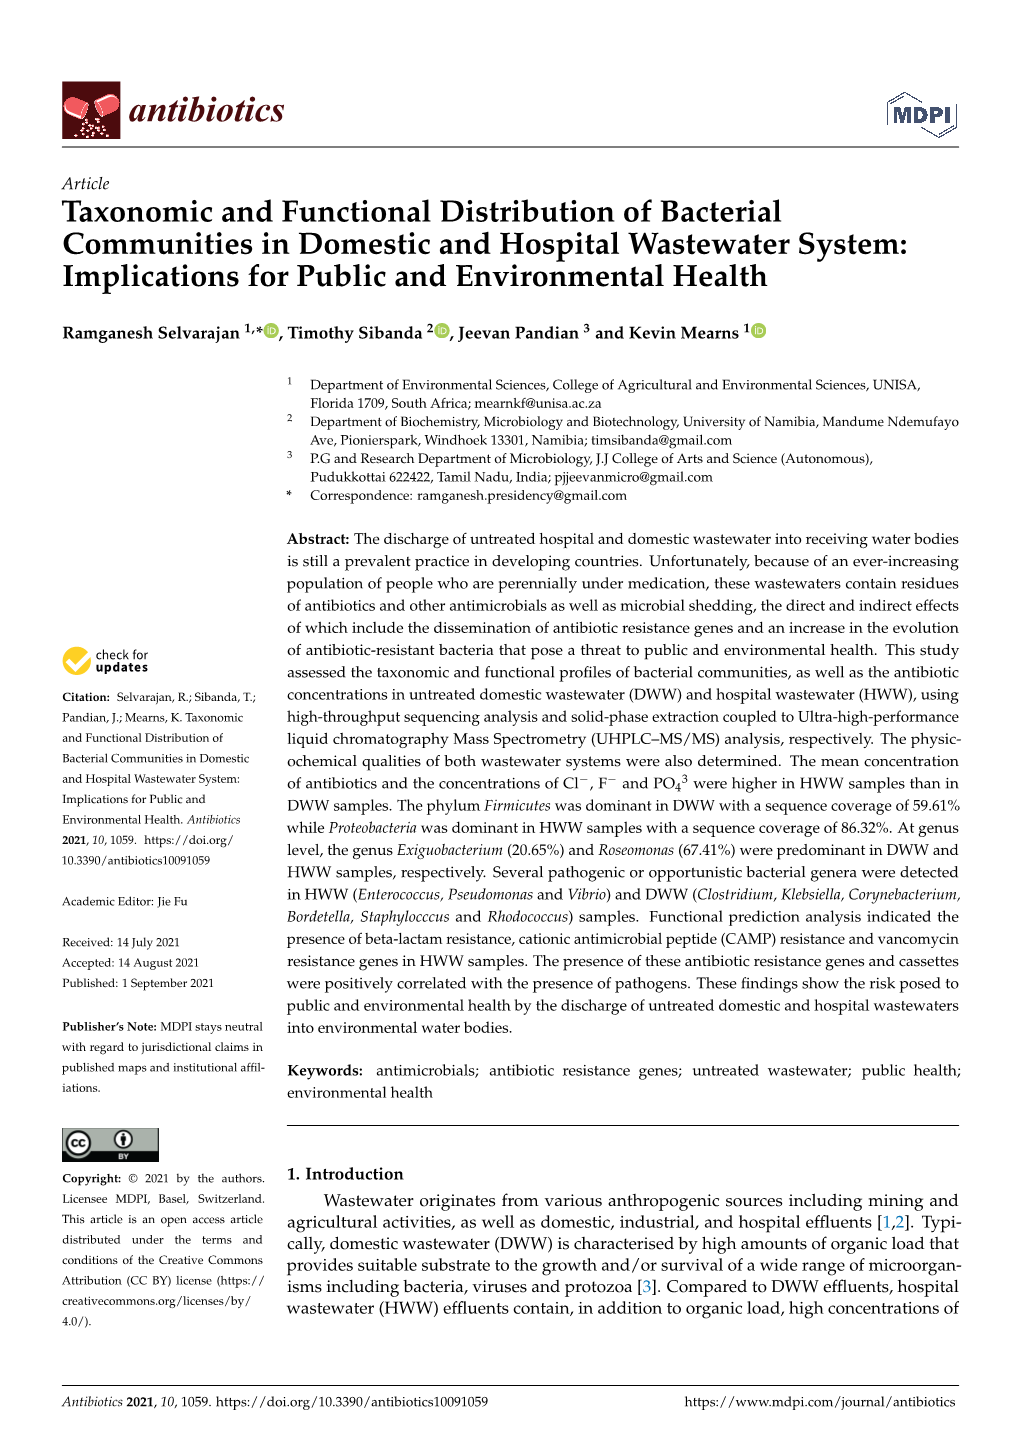 Taxonomic and Functional Distribution of Bacterial Communities in Domestic and Hospital Wastewater System: Implications for Public and Environmental Health